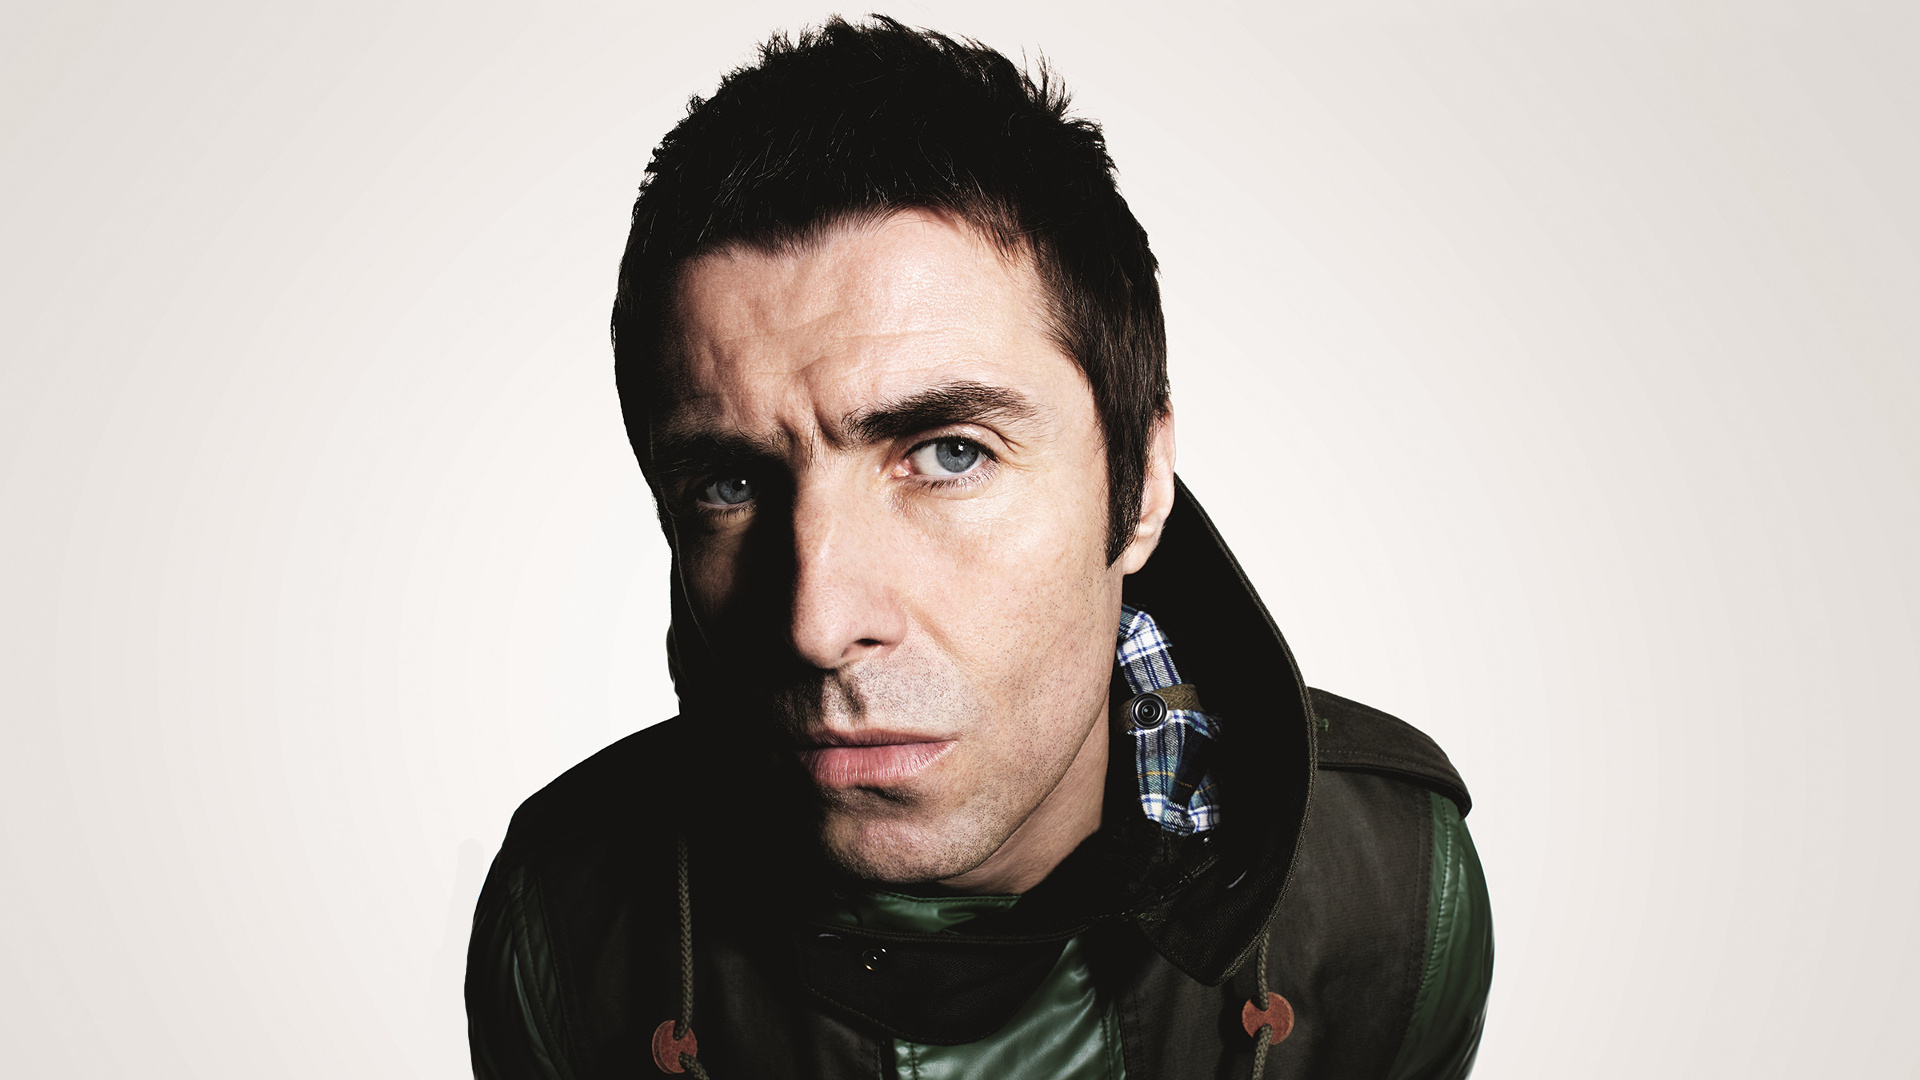 Liam Gallagher Wallpapers posted by Samantha Thompson 1920x1080